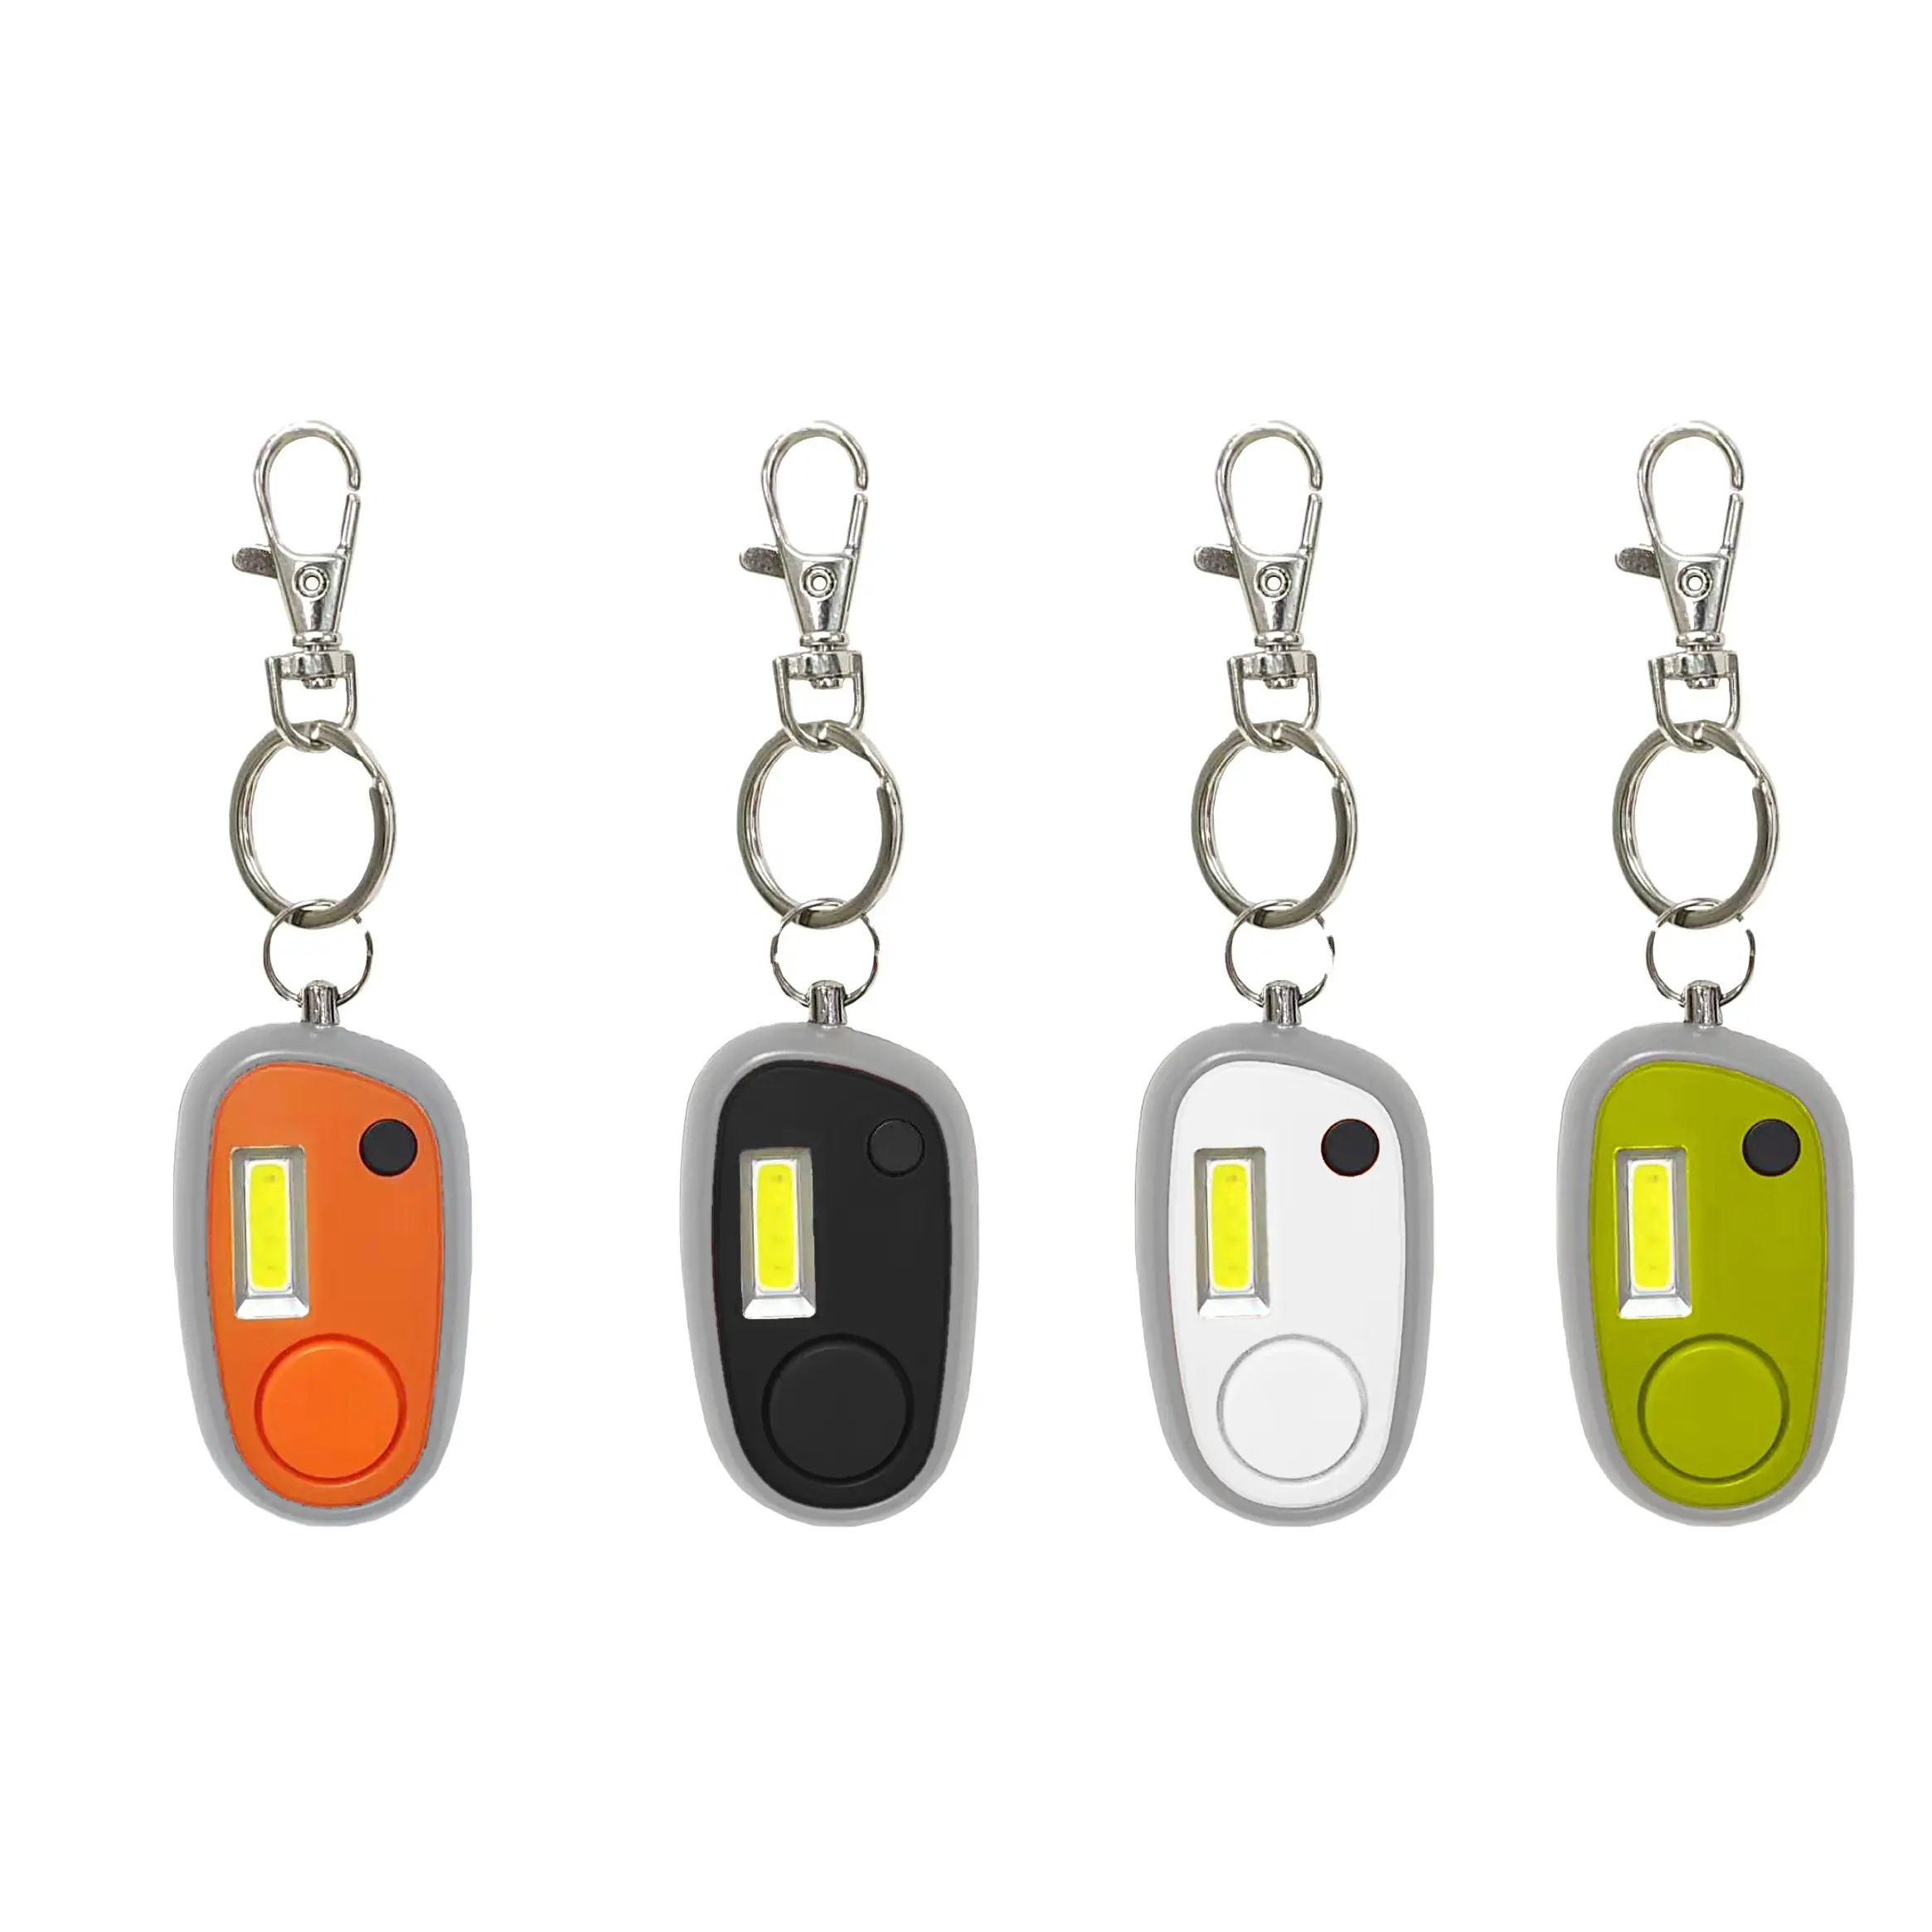 Battery Powered 150DB Self Defense Personal Emergency SOS Alarm Keychain Keyring With LED Light For Woman And Safety